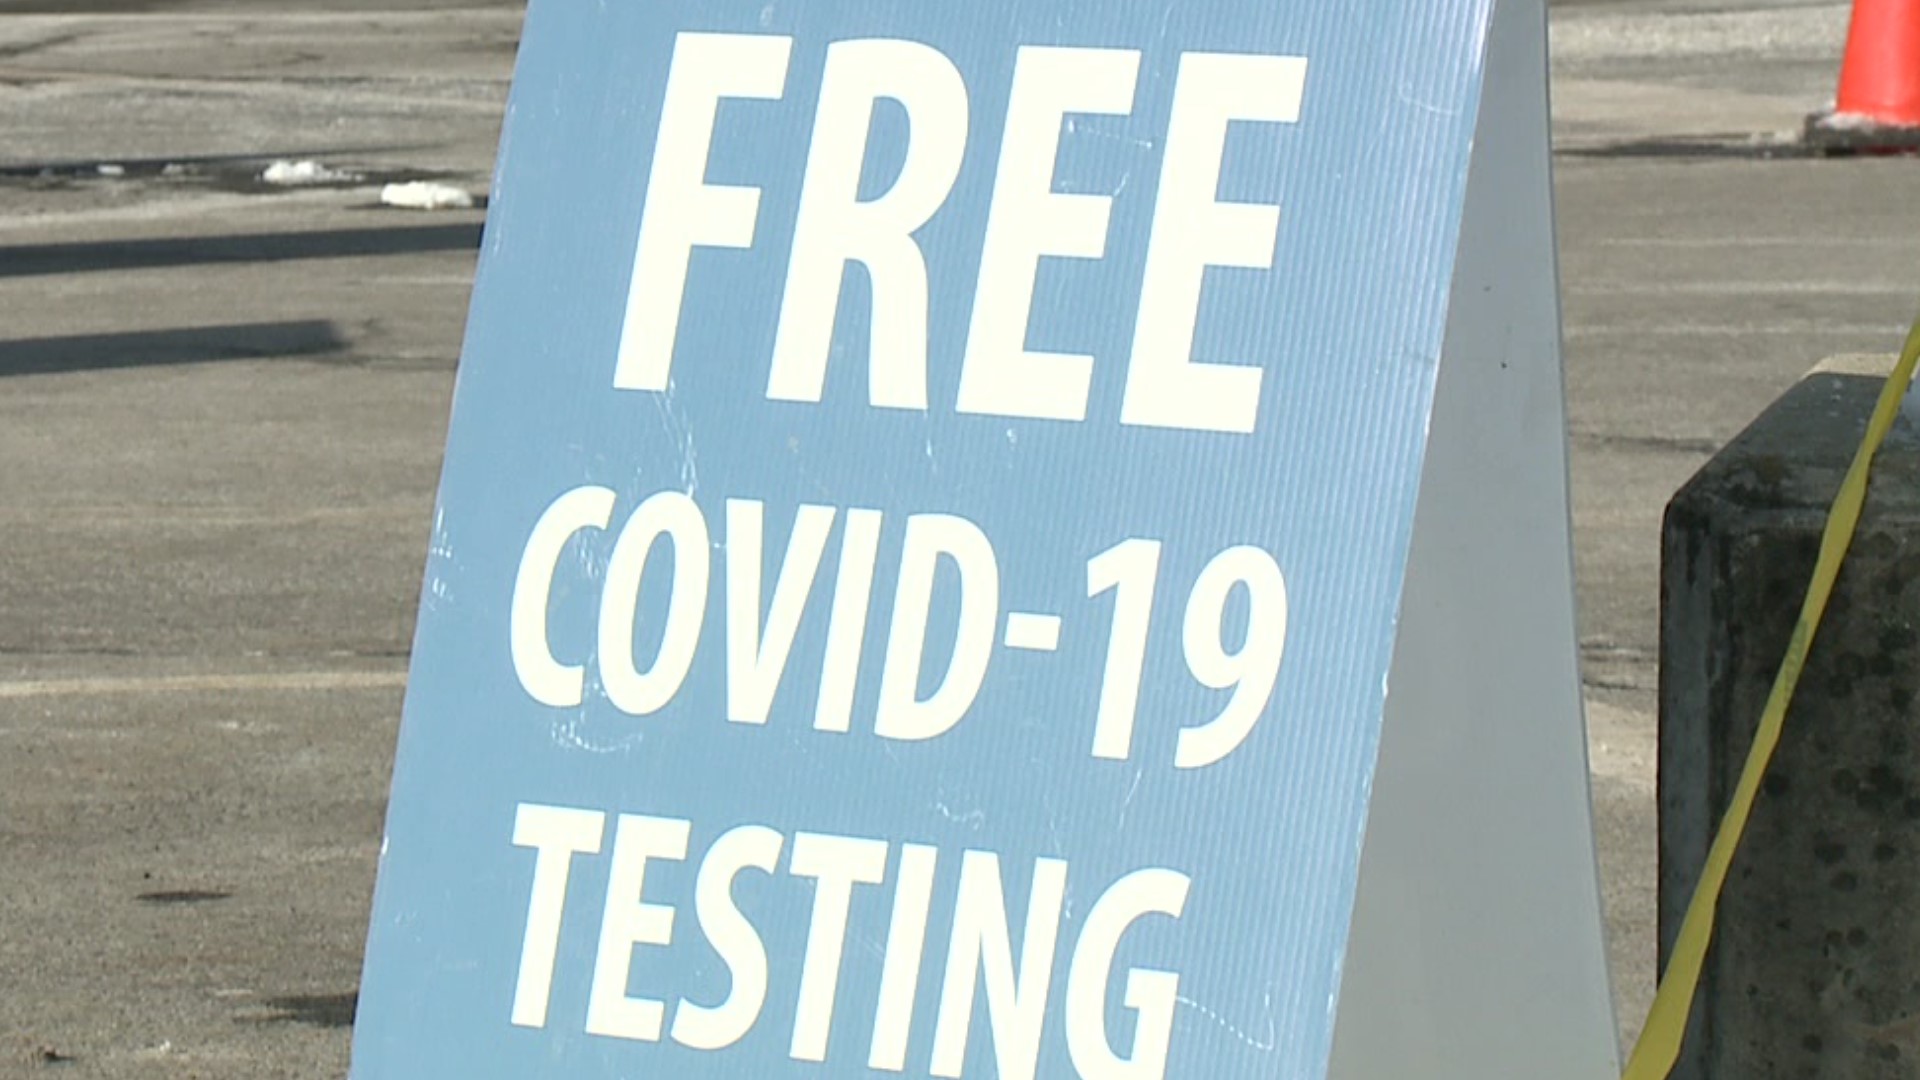 Coronavirus tests will be available in Lycoming and Susquehanna Counties beginning March 1.